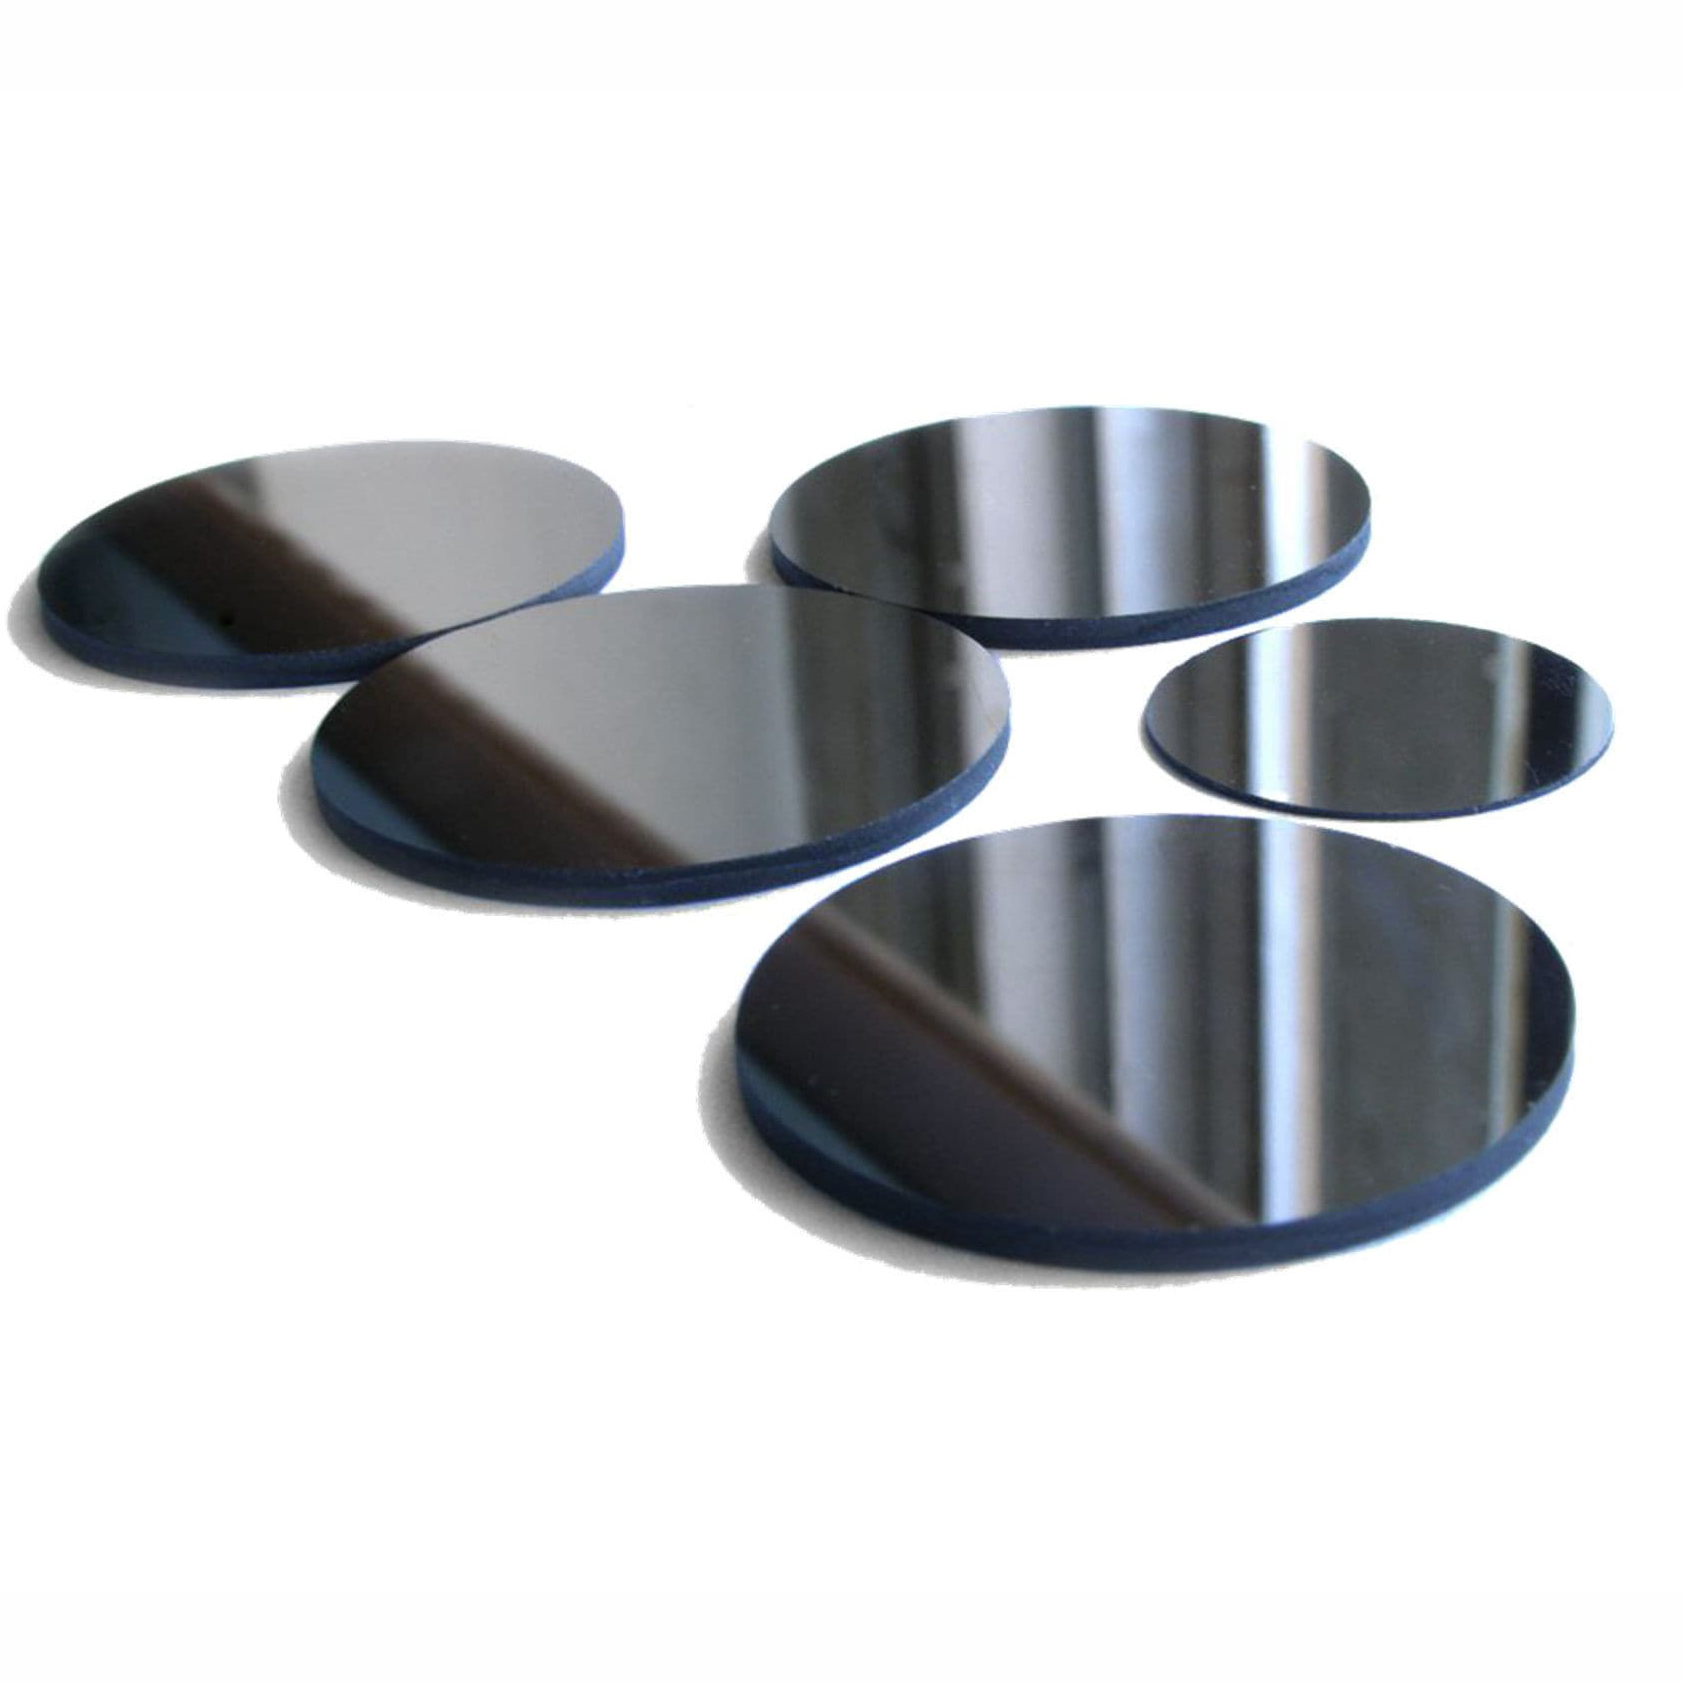 Polycrystalline Cubic Boron Nitride (PCBN) yeMachining Applications Featured Image